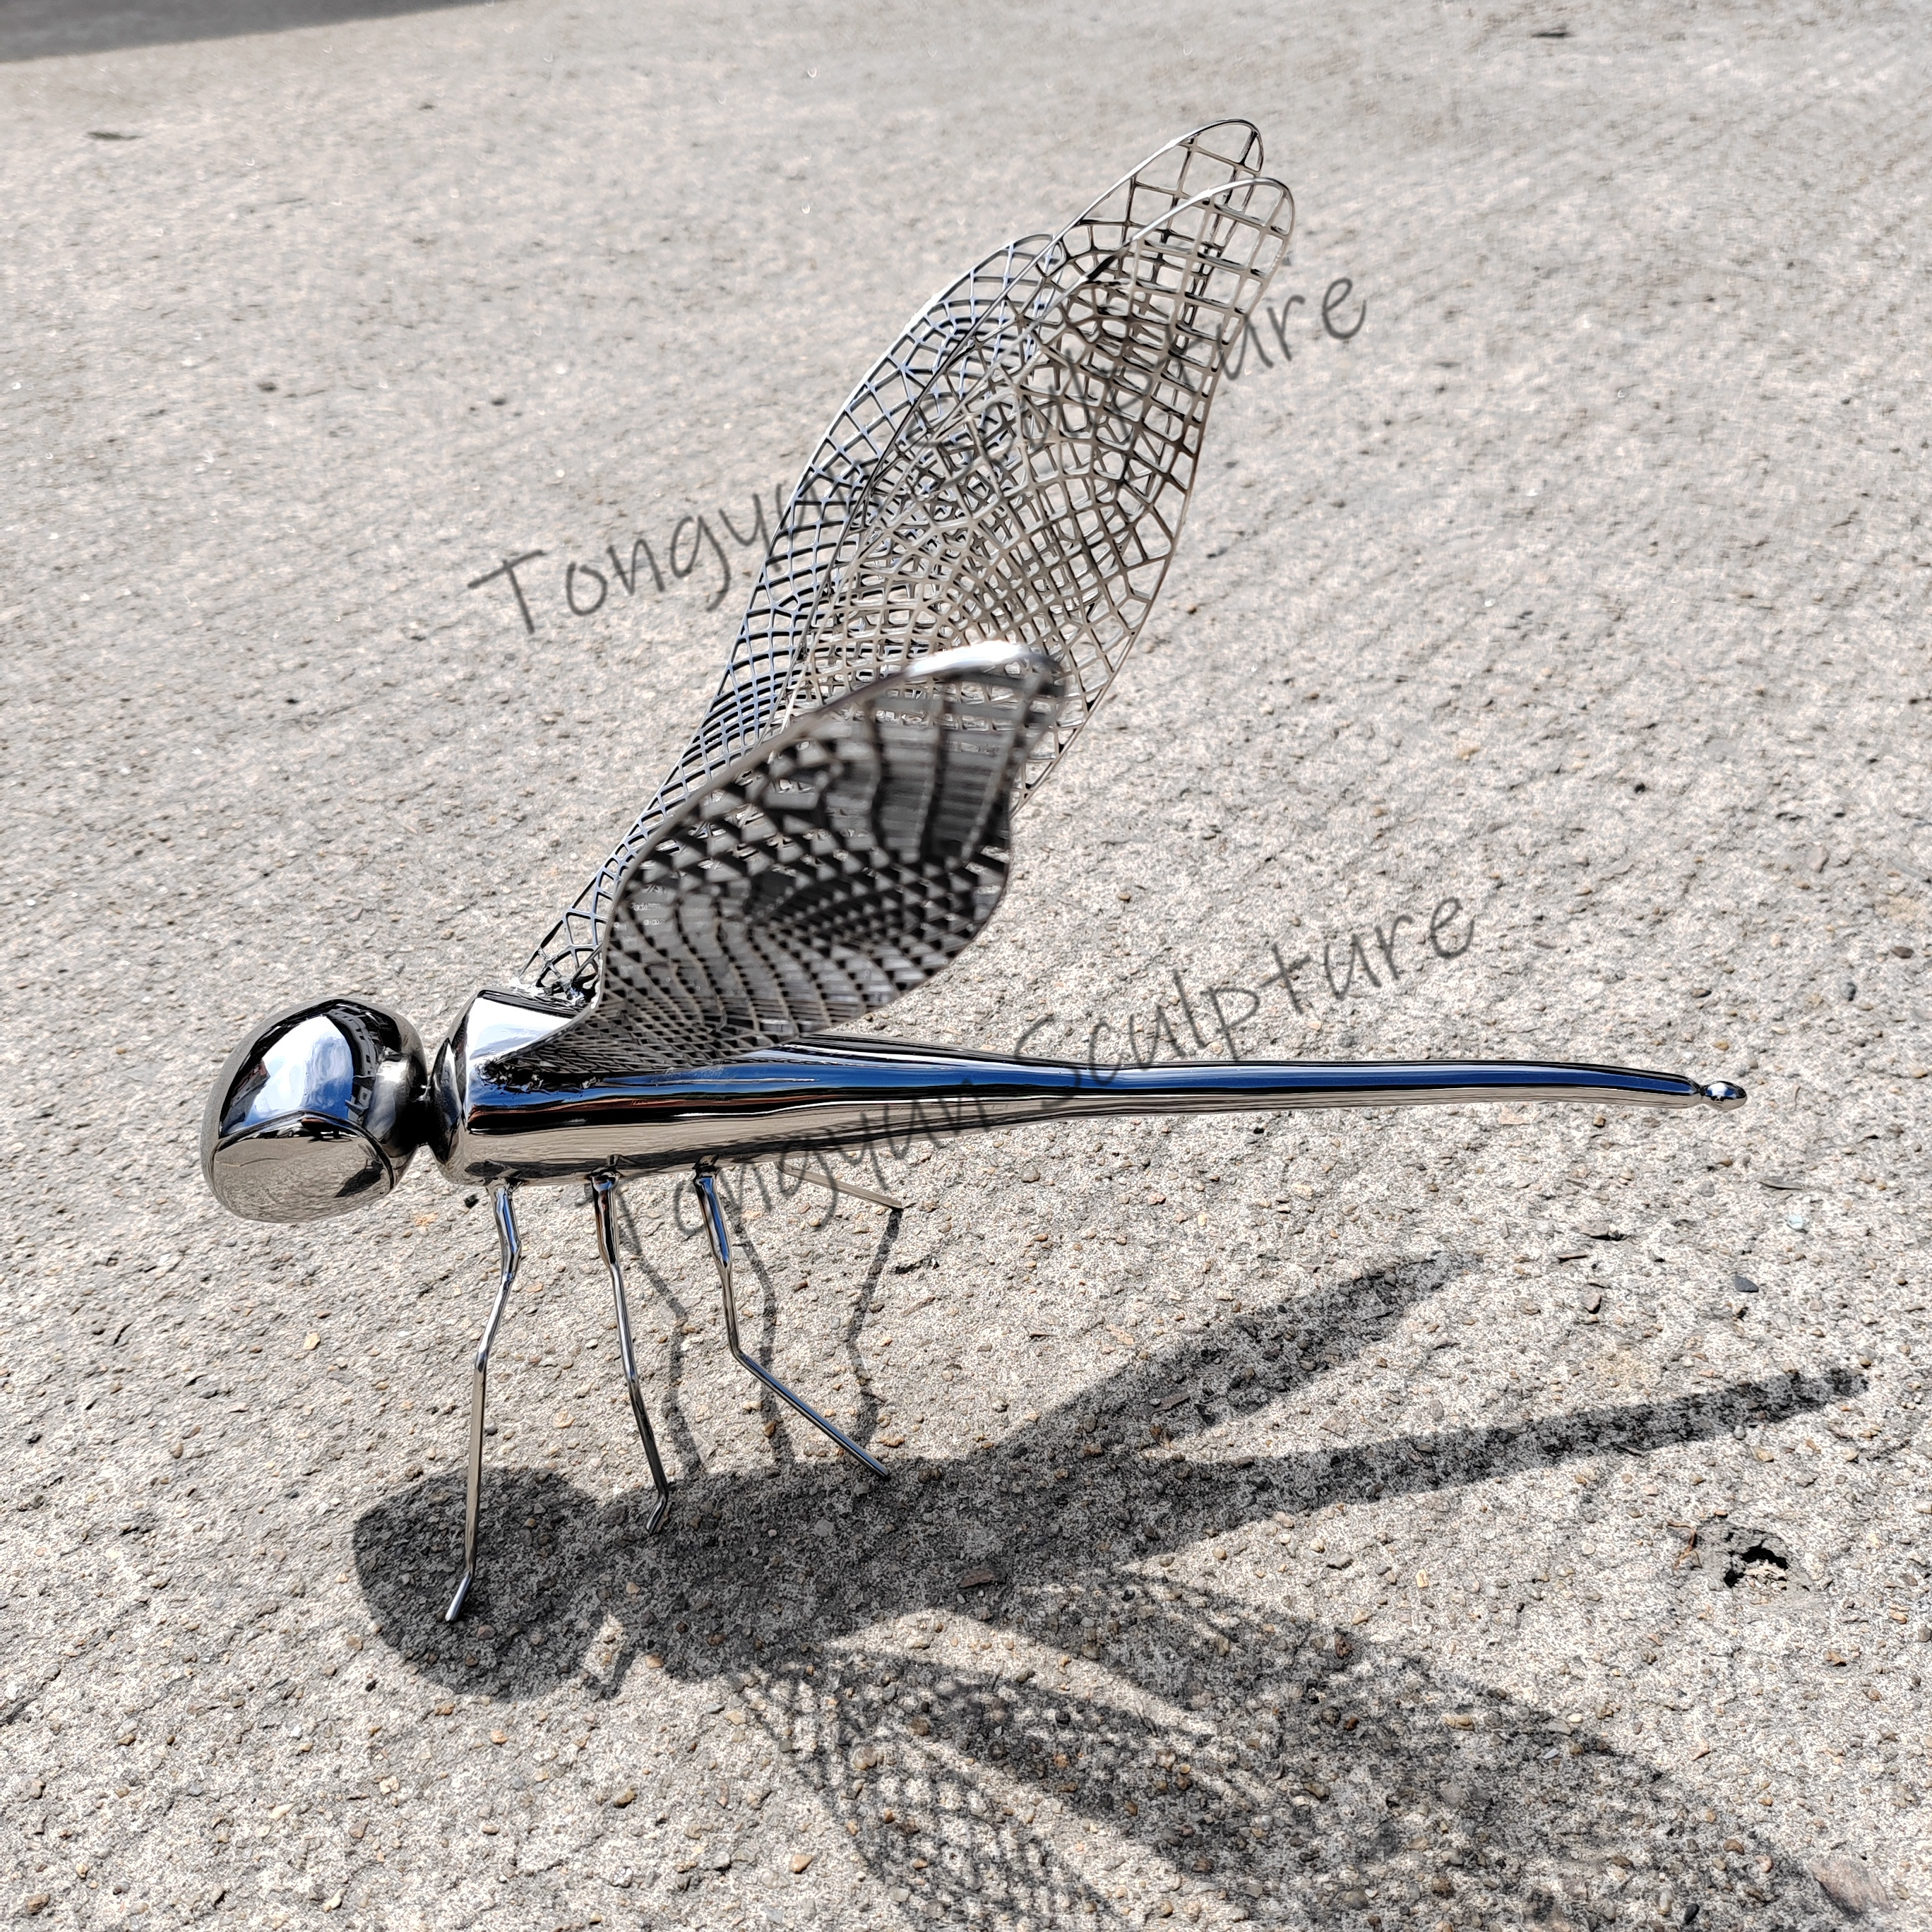 Outdoor Garden Decorative Metal Animal Statue Life Size Stainless Steel Dragonfly Sculpture